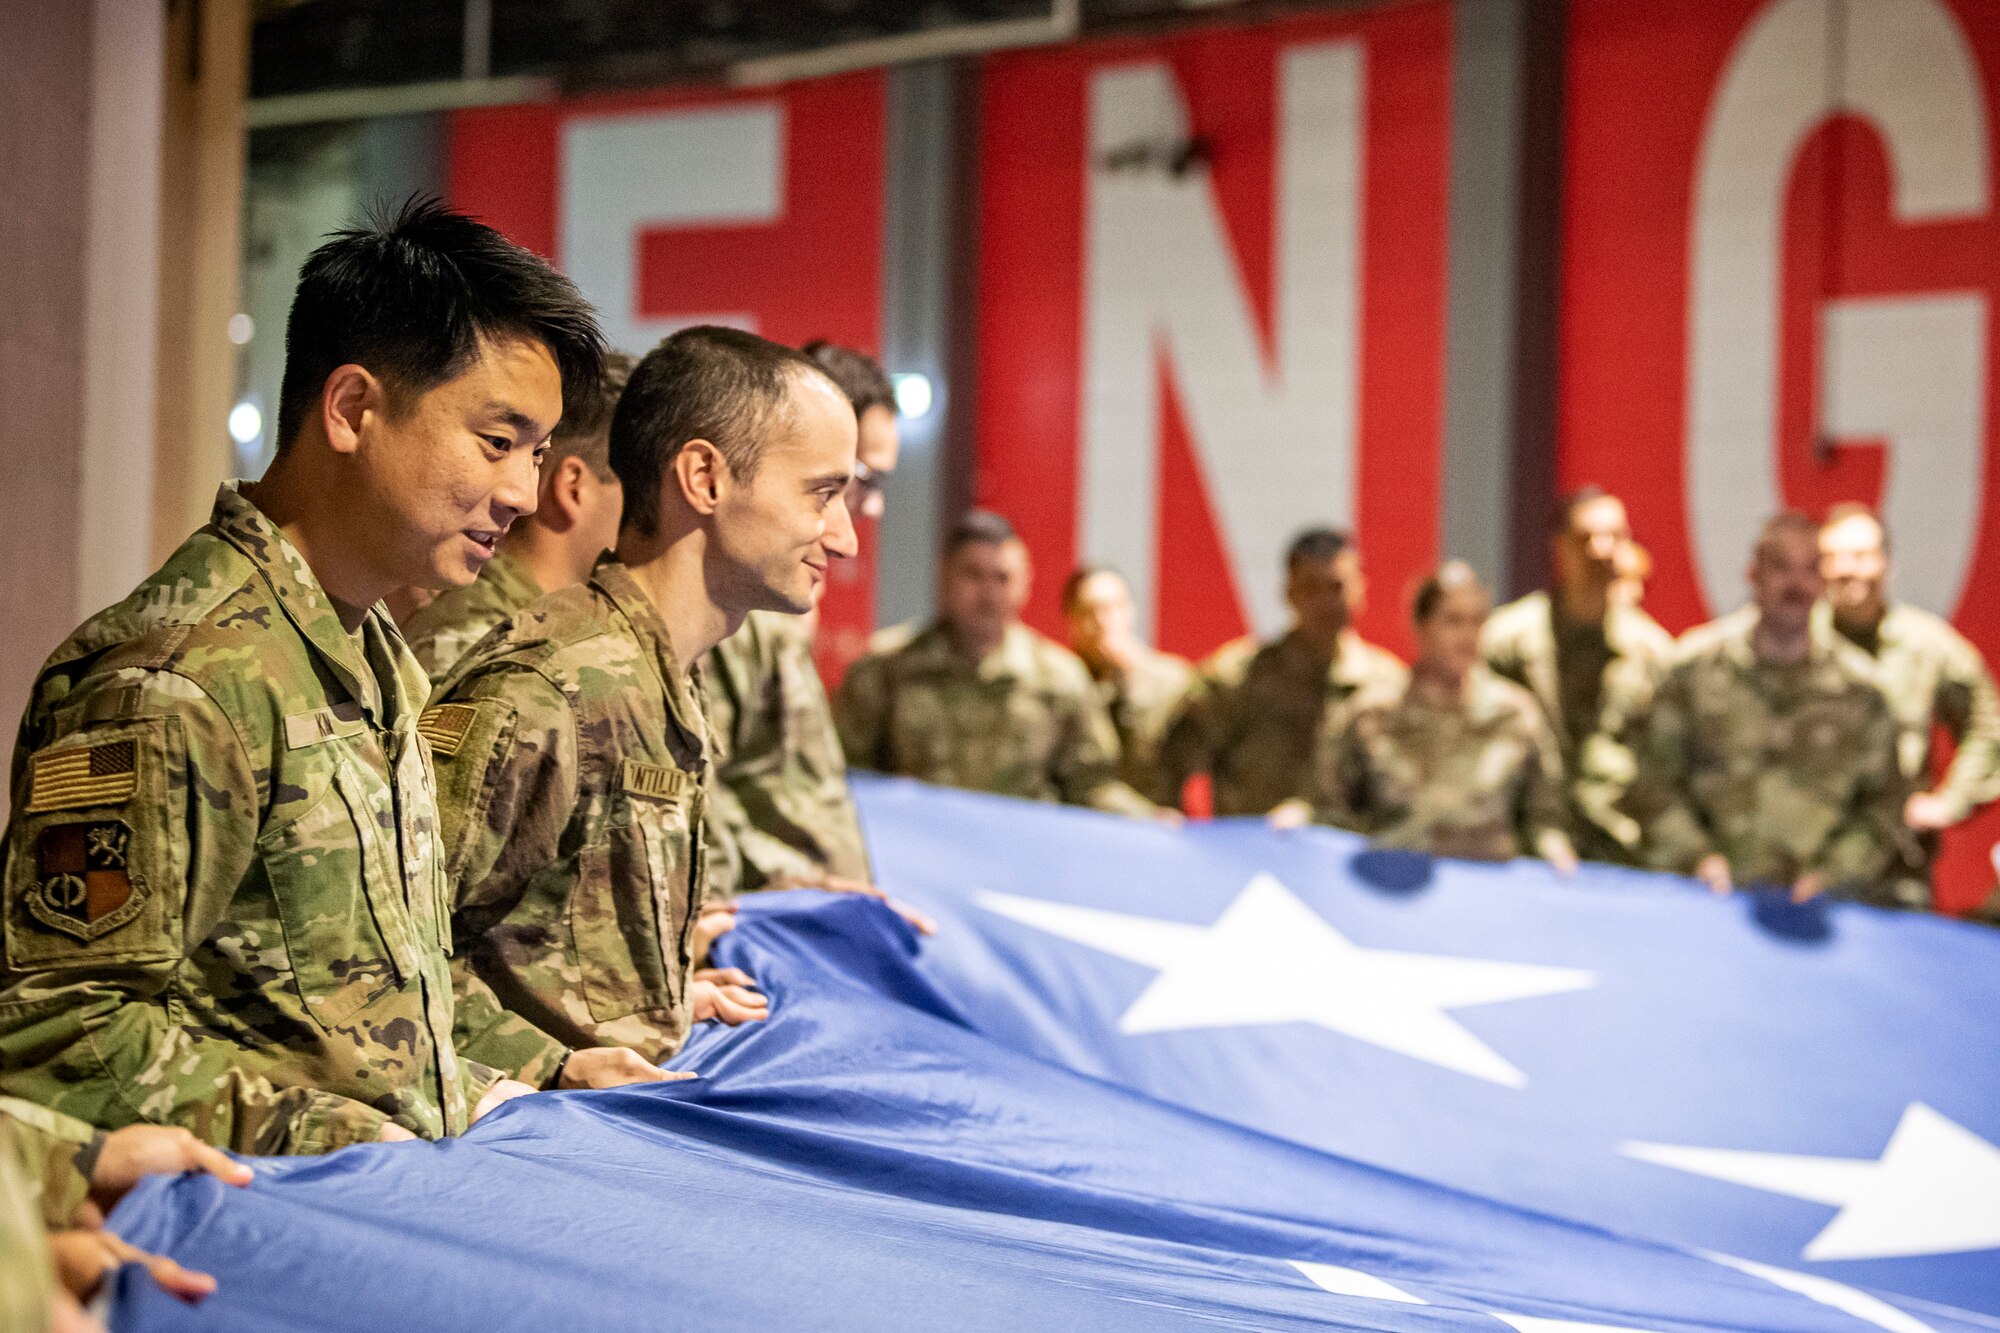 U.S. Air Force Staff Sgt. Jae Yen Kim, left, 501st Combat Support Wing resource advisor, holds an American flag along with Airmen from the 501st CSW, at Wembley Stadium, in London, England, Oct. 30, 2022. Approximately 70 uniformed personnel represented the U.S. Air Force and nation by unveiling an American flag during the pre-game ceremonies of the Jacksonville Jaguars and Denver Broncos NFL game. (U.S. Air Force photo by Staff Sgt. Eugene Oliver)